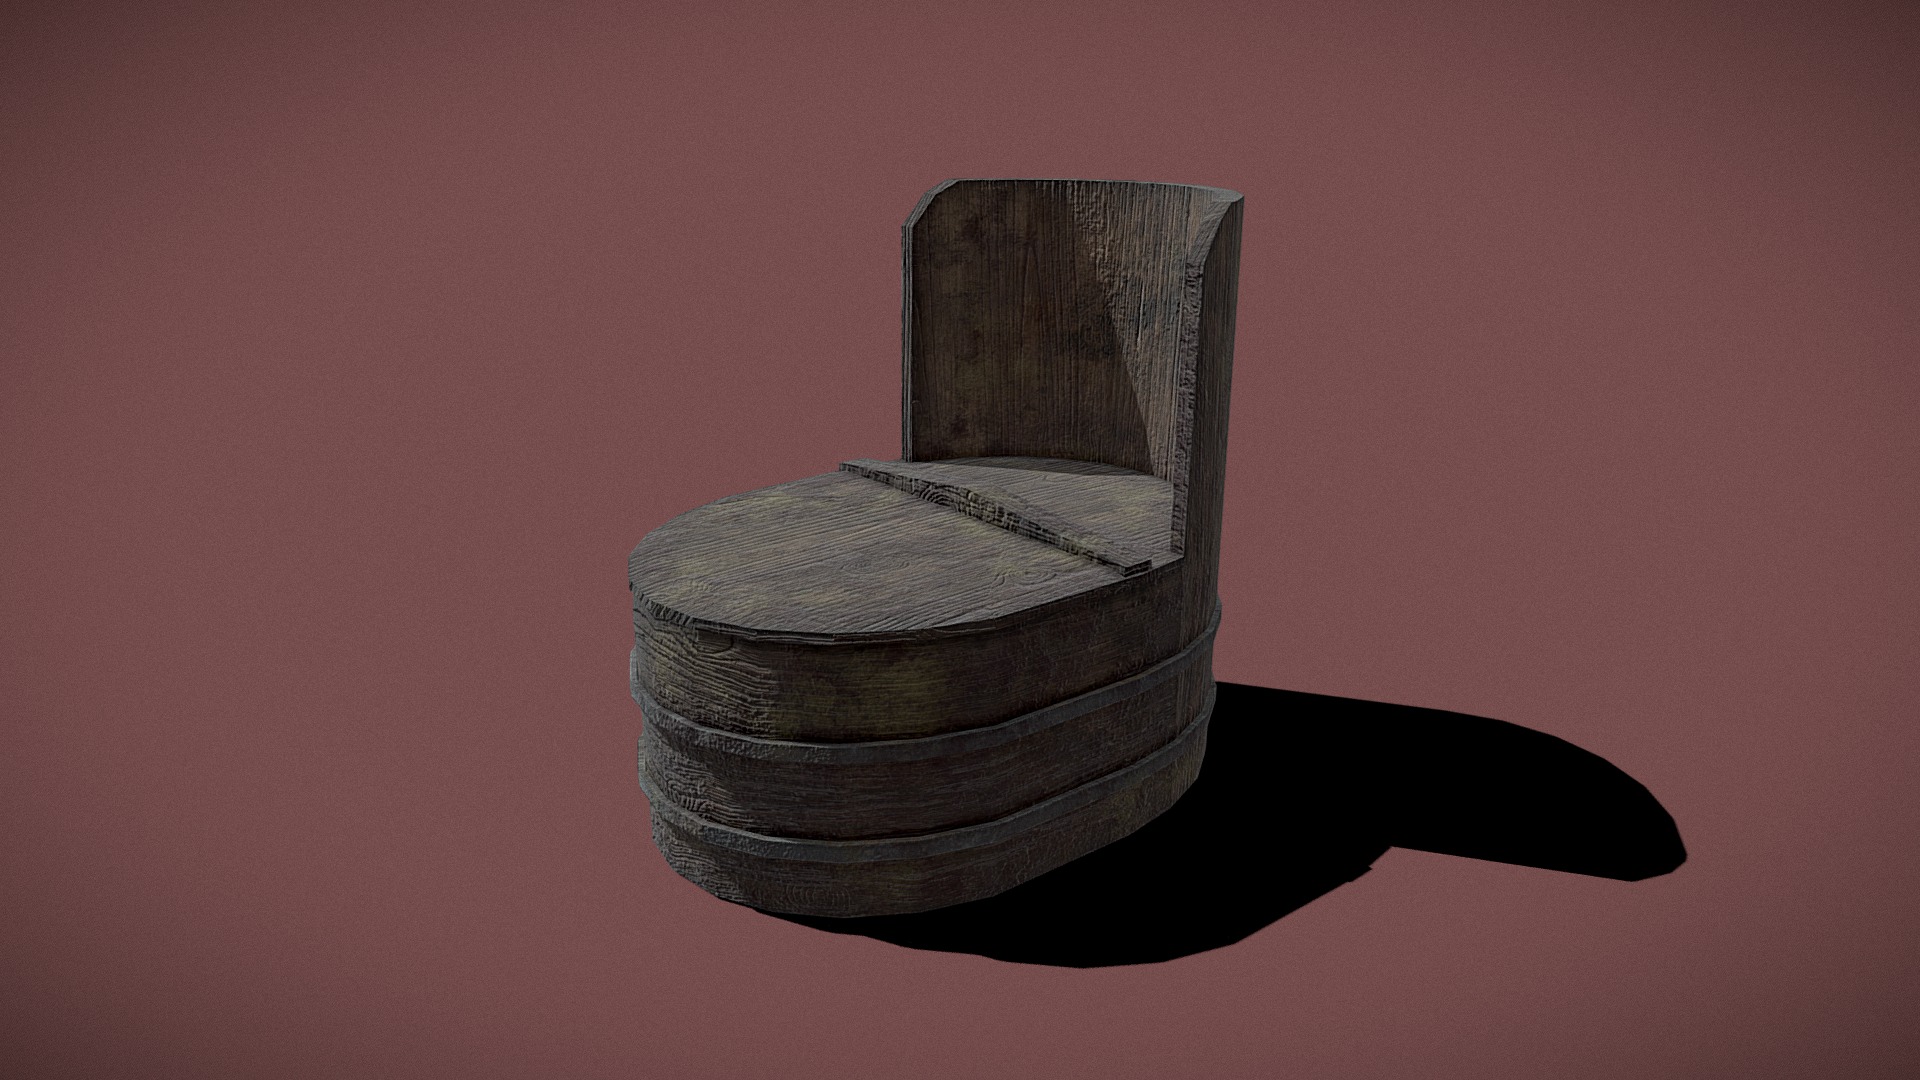 3D model Chamber Pot - This is a 3D model of the Chamber Pot. The 3D model is about a wooden gavel on a red background.